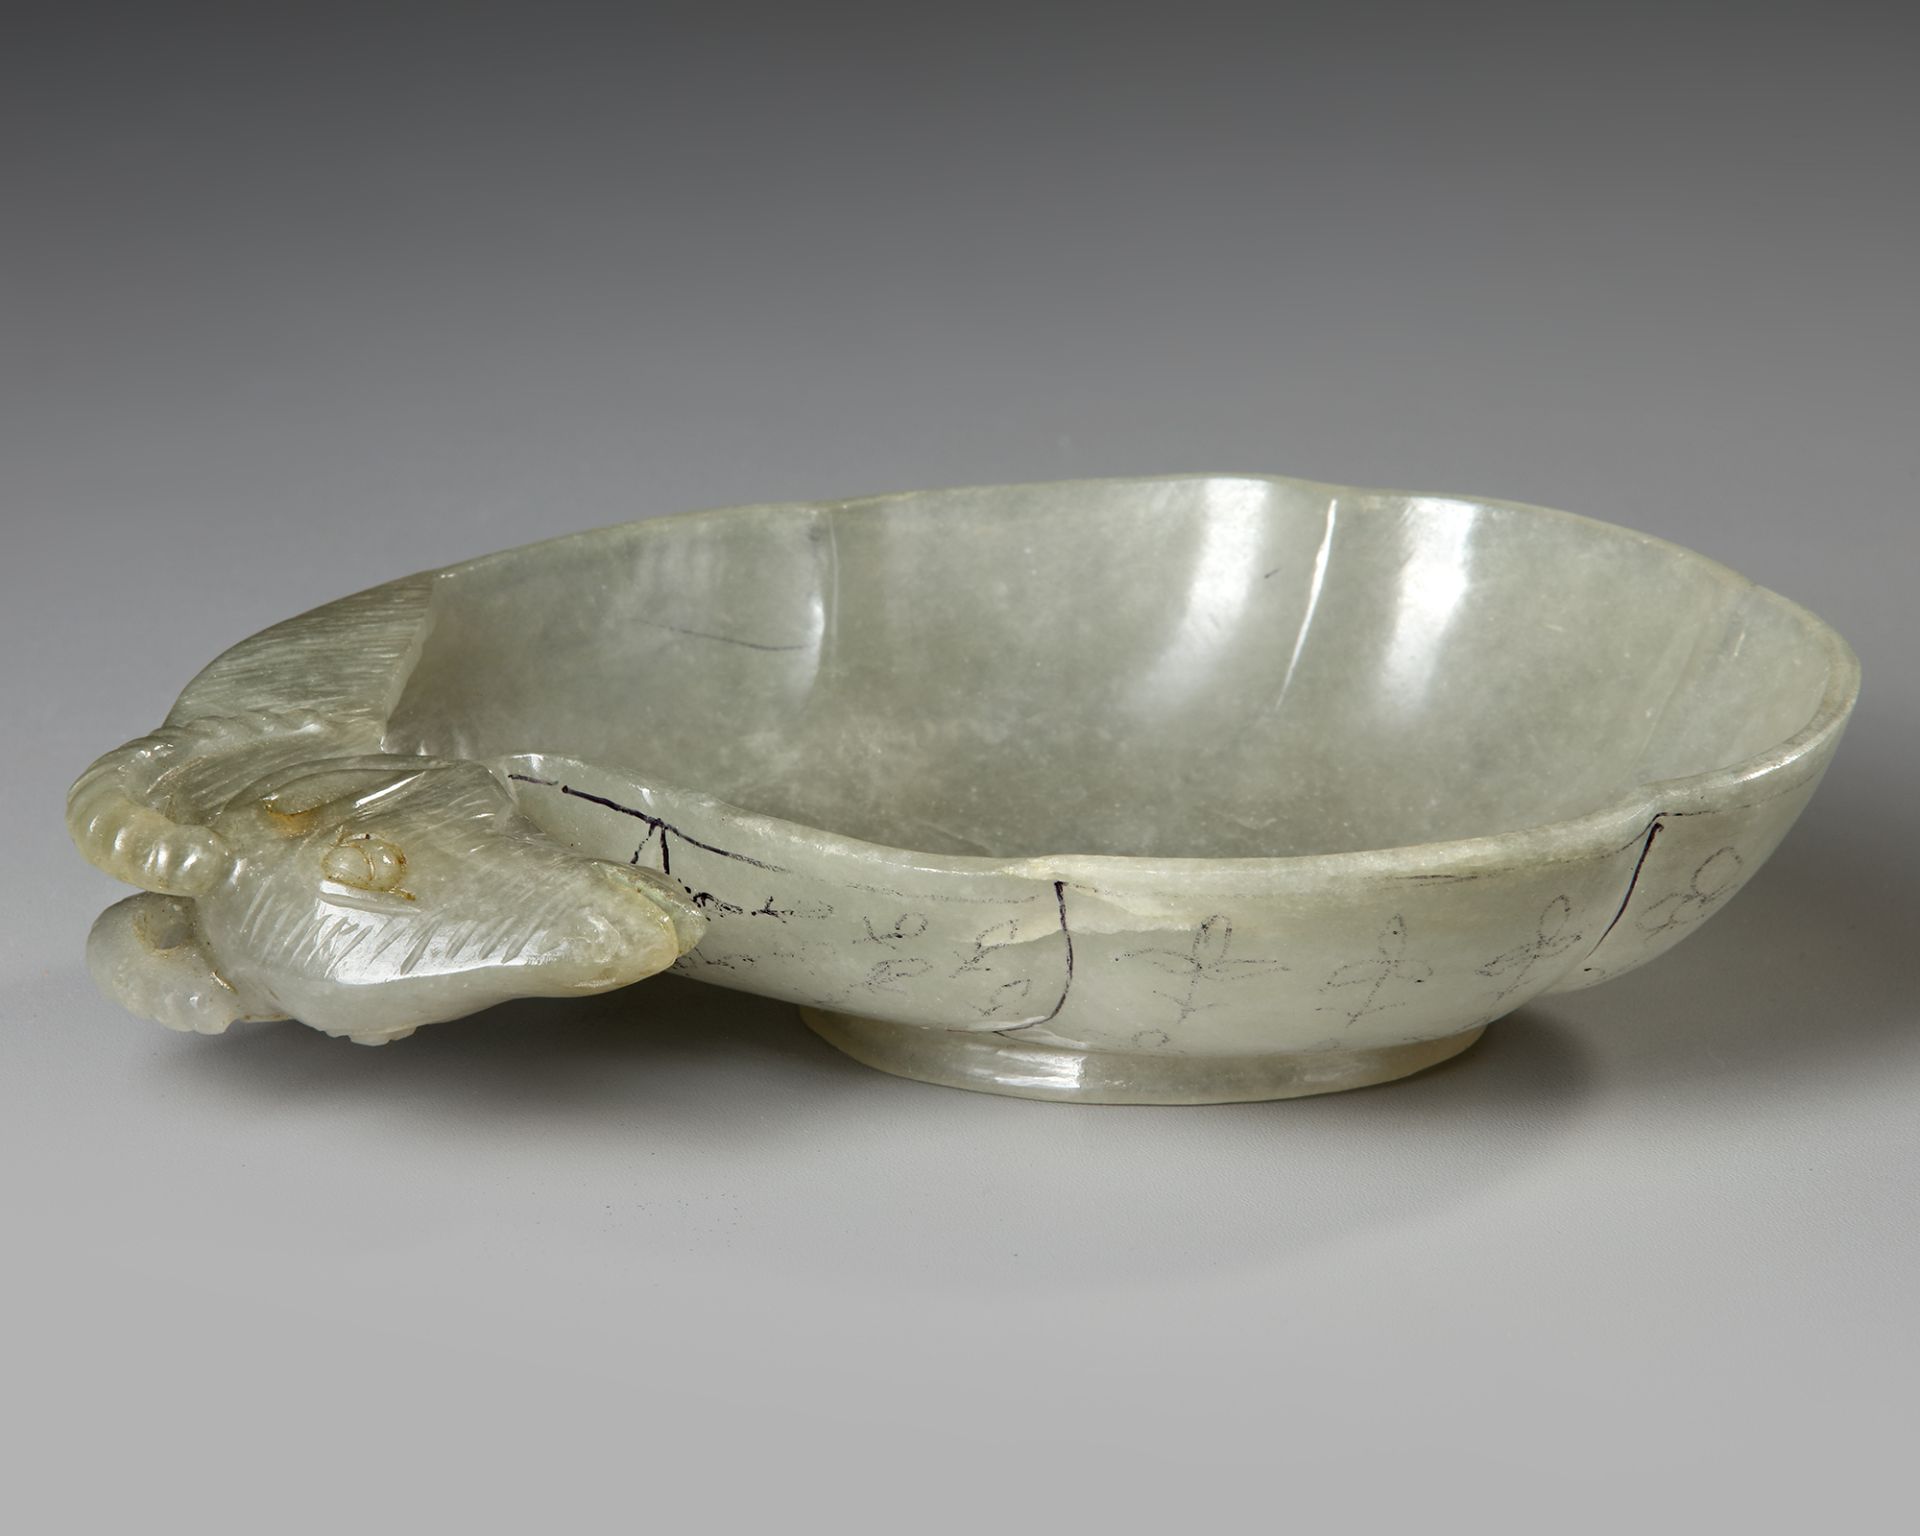 A CHINESE RAM HEAD JADE BRUSH WASHER, QING DYNASTY (1644-1911) - Image 2 of 5